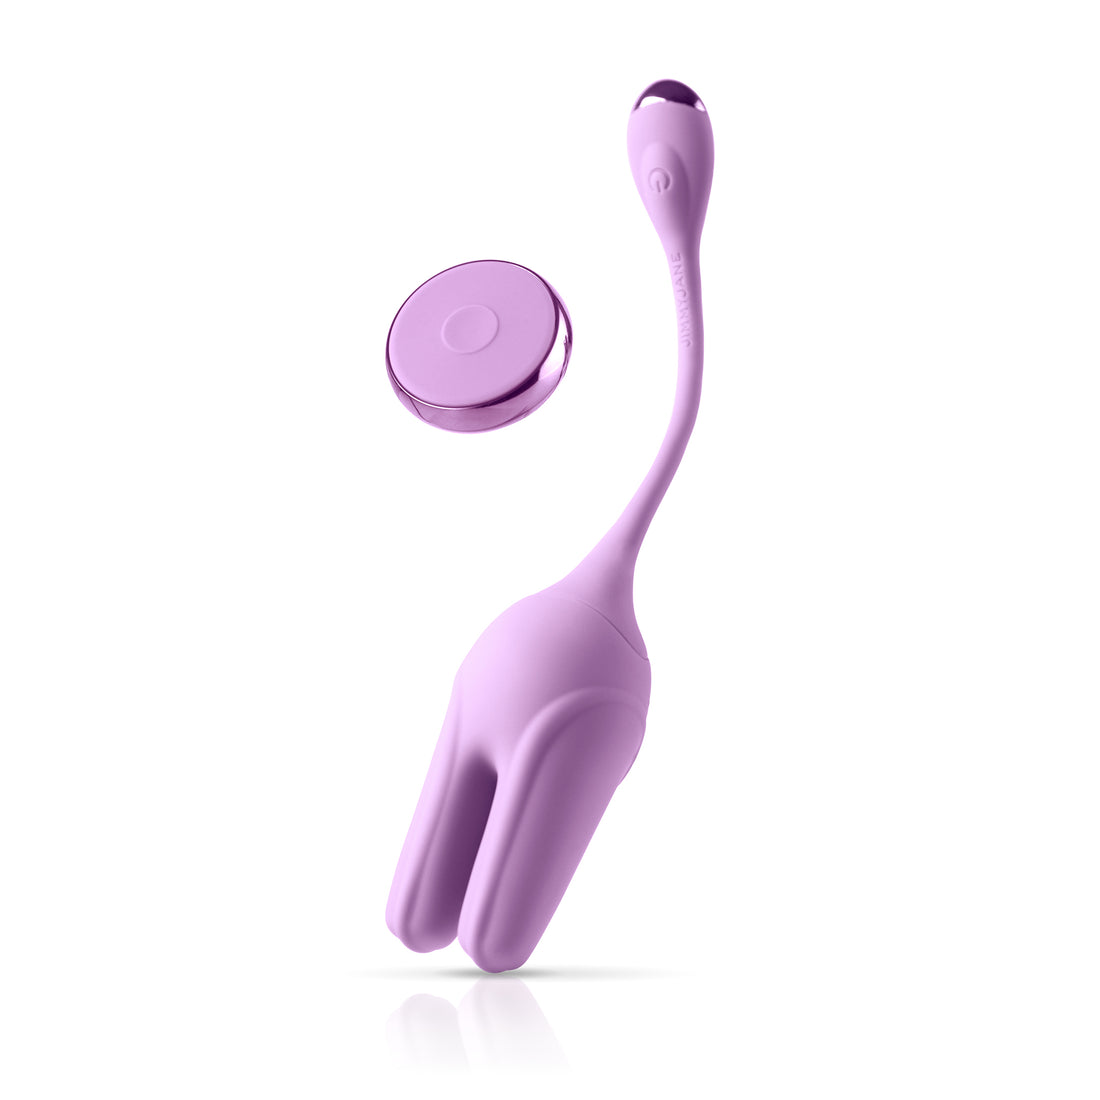 Vibrating dual motor kegel trainer with remote